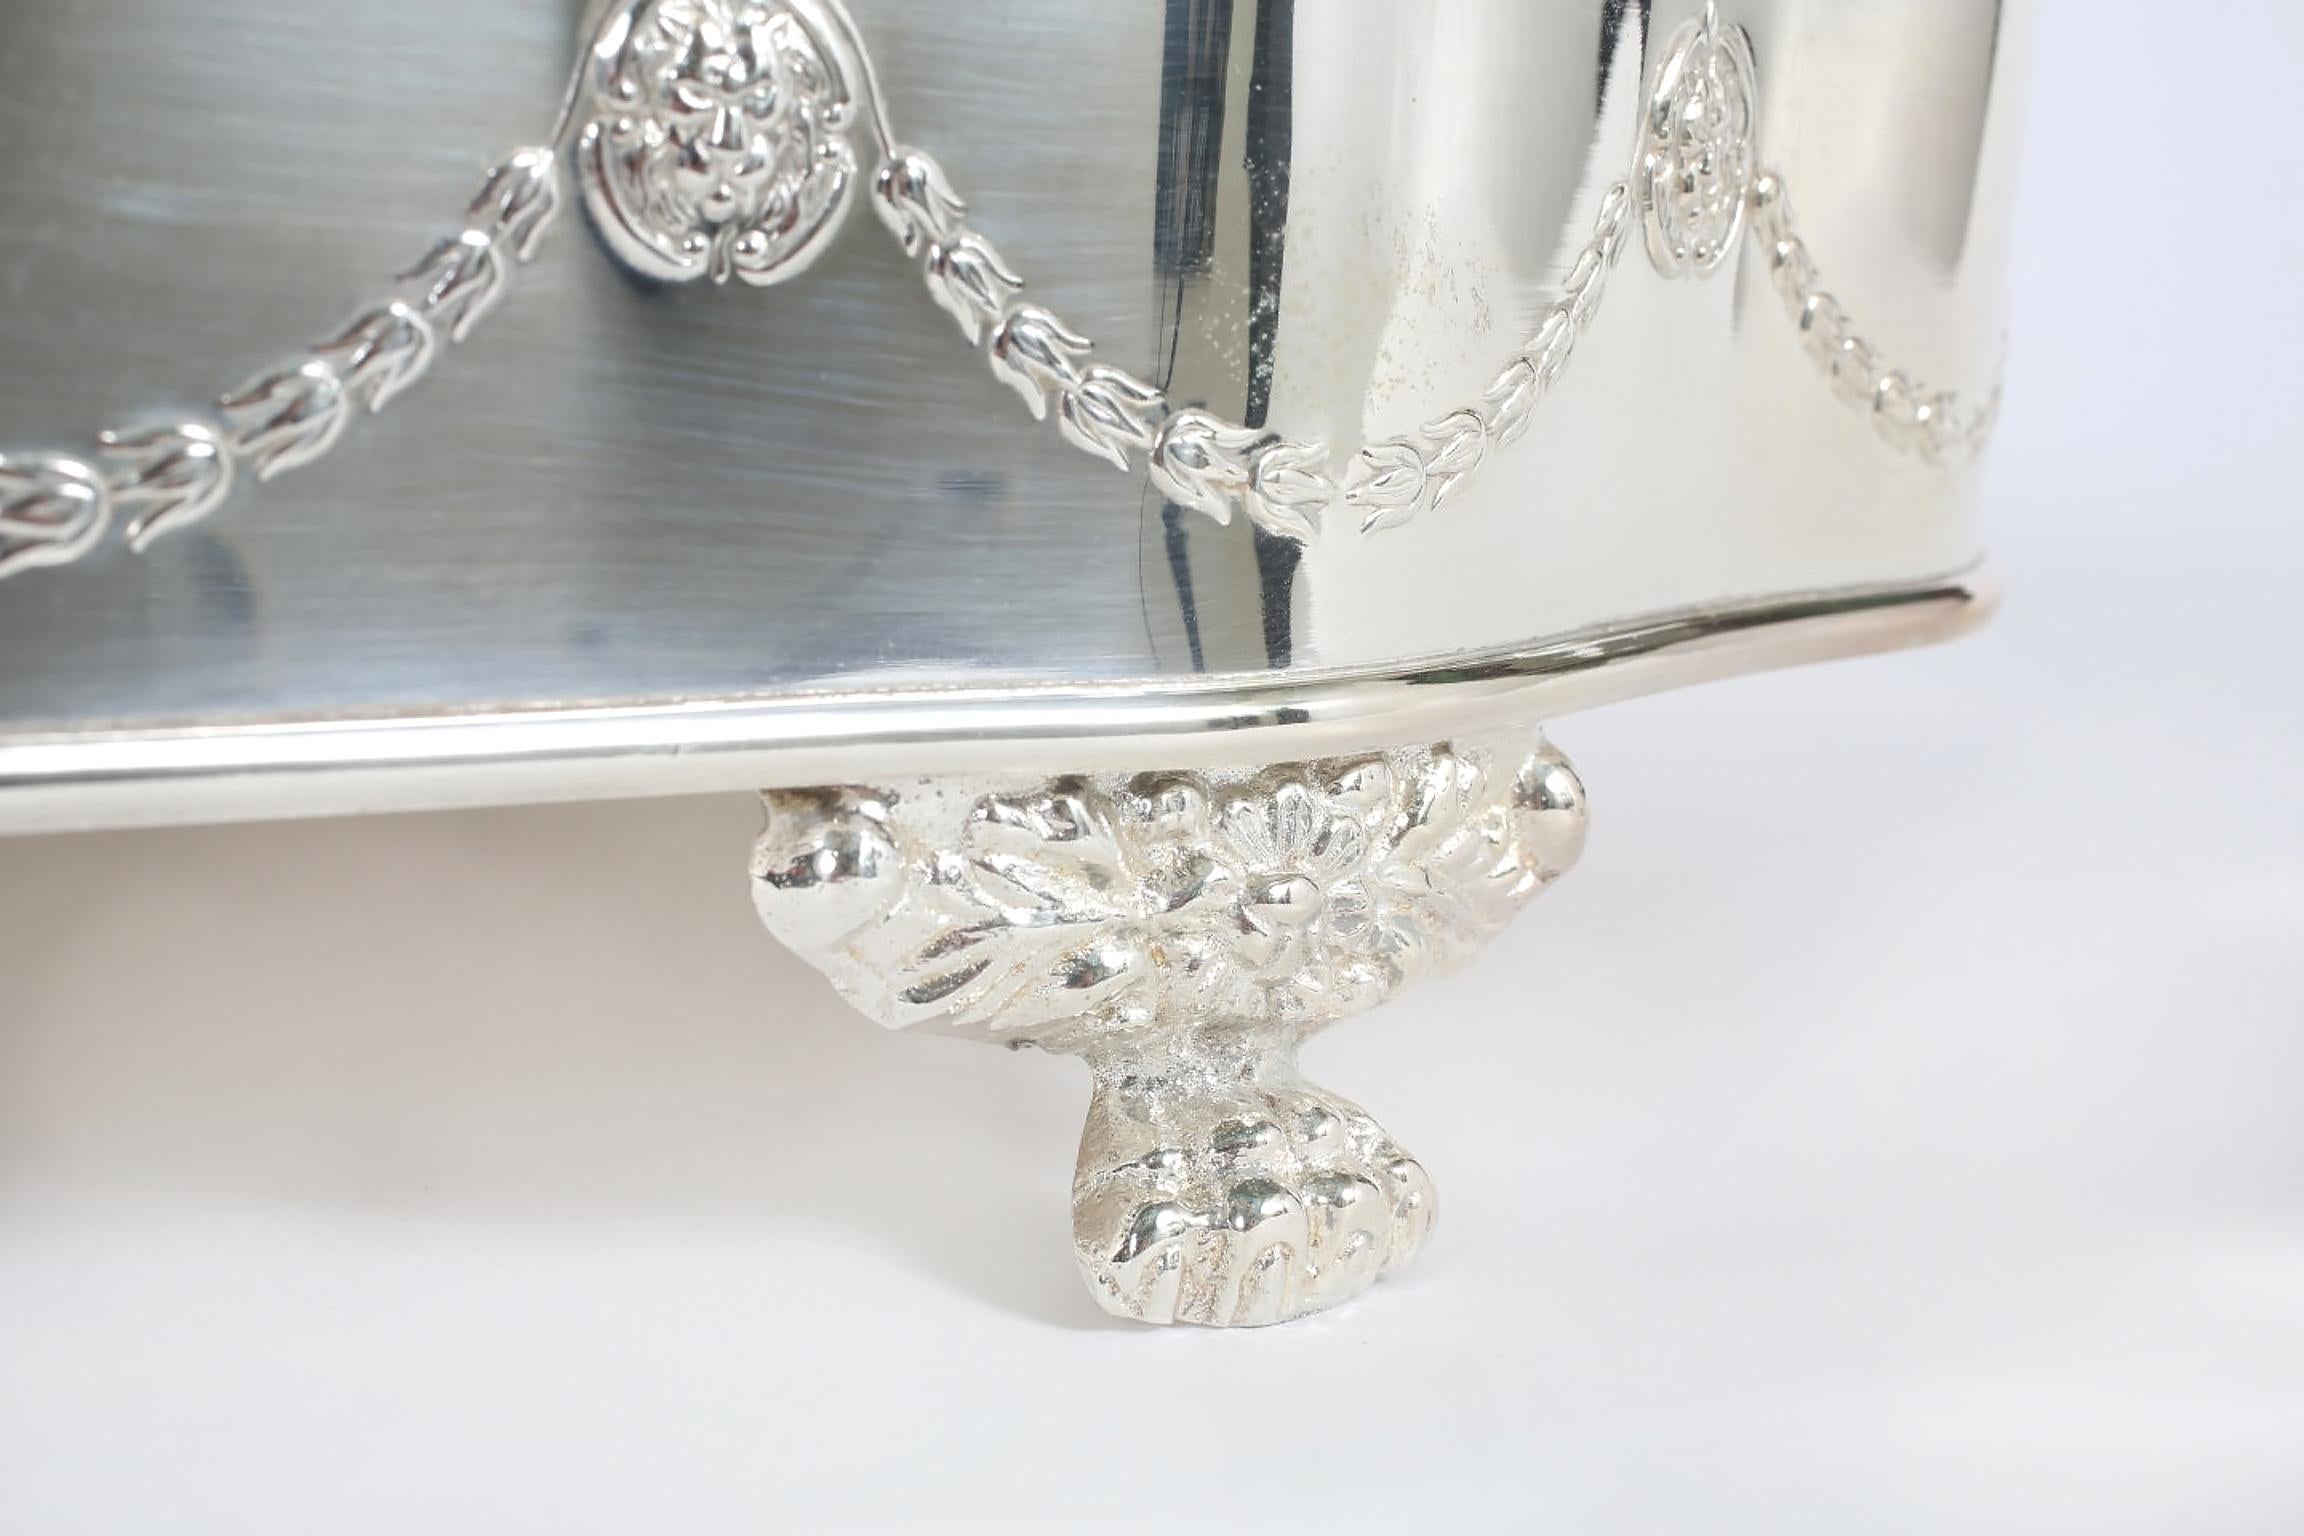 English Sheffield silver plated barware / tableware footed tray with interior / exterior design details. The tray is in great vintage condition with wear consistent with age / use. The tray is about 23